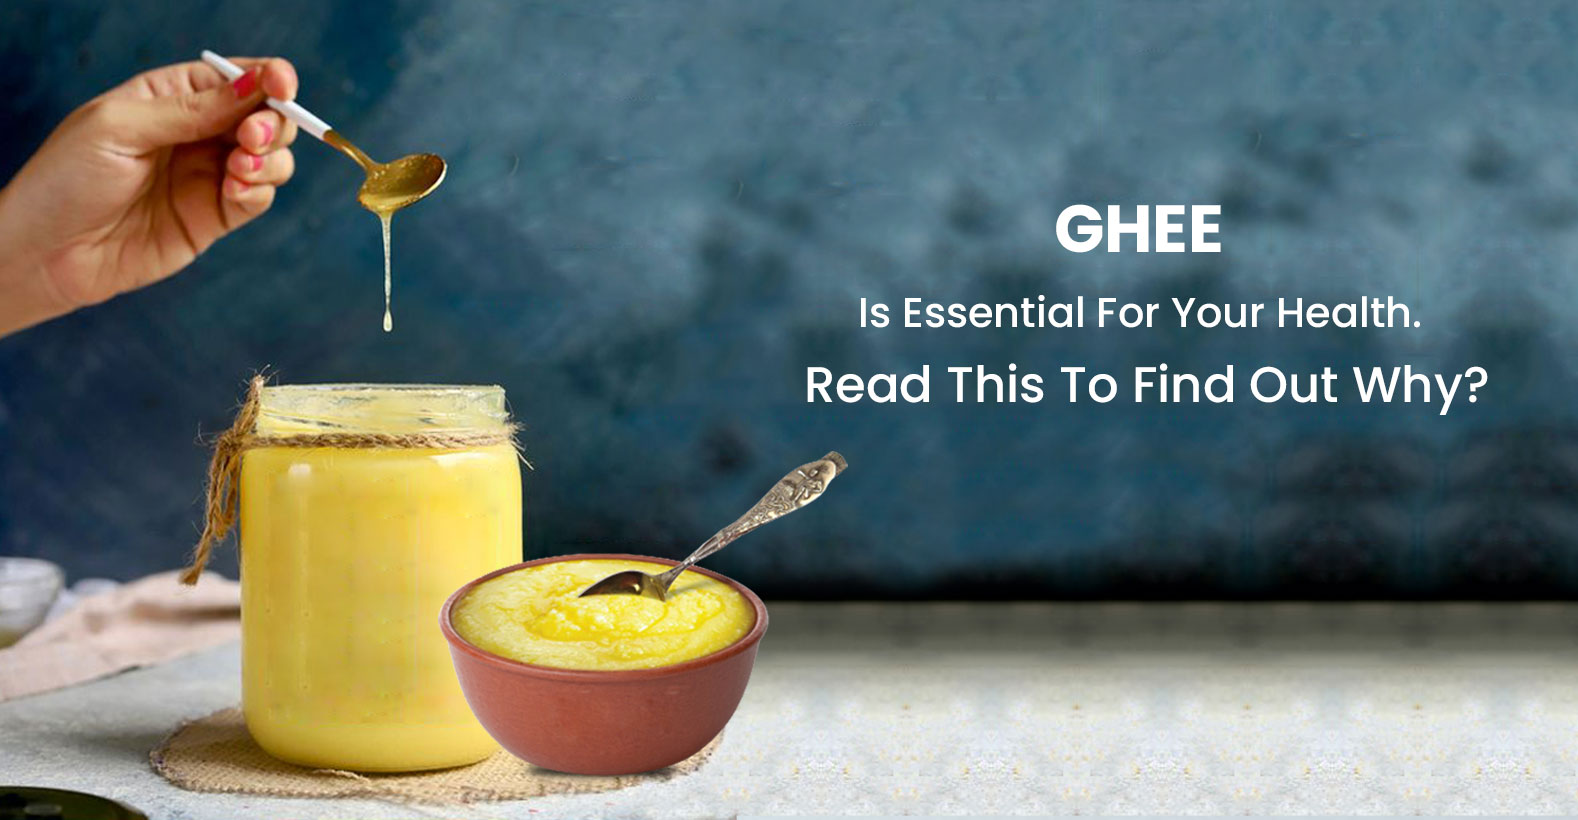 Little Known Ways To Rid Yourself from Ghee & It's Benefits